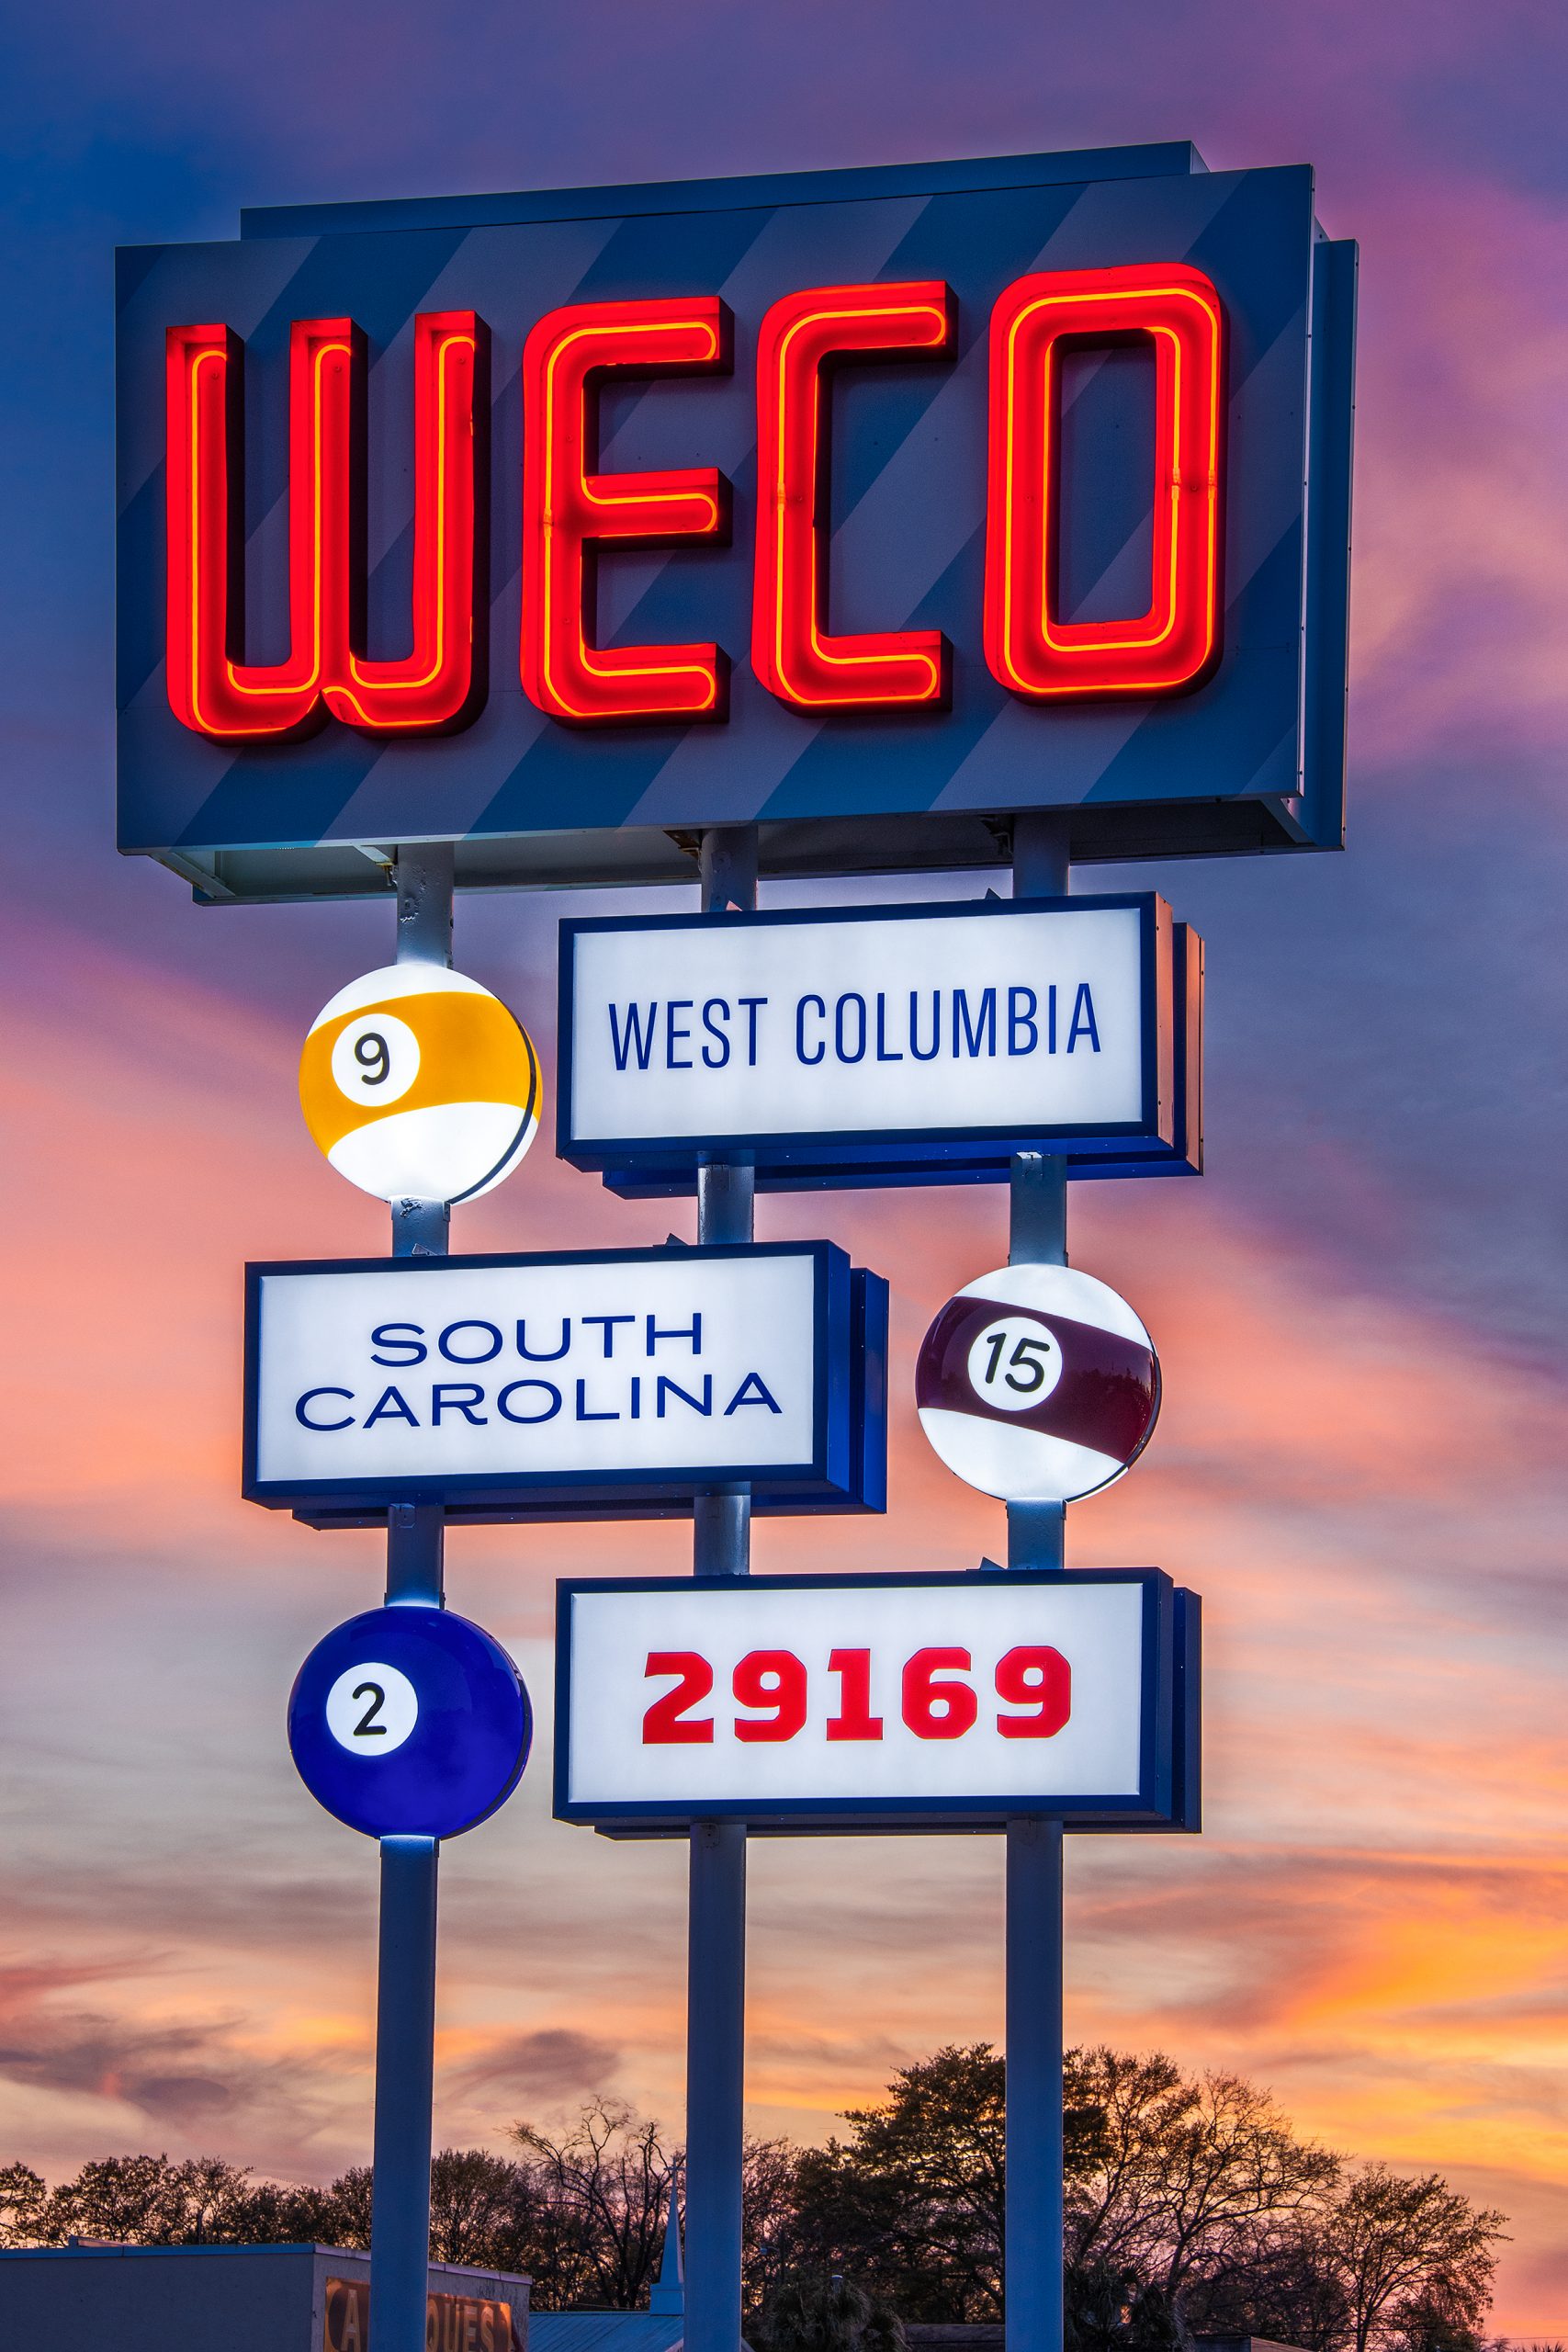 Using bright neon colors, the recent invigoration of the WECO signage in West Columbia draws the attention of travelers entering city limits. Riggs Partners and West Columbia leaders joined to renovate a classic sign from the 1960s, wanting visitors to know that West Columbia cares about the culture of its past and future in the renovation of this flagship sign.